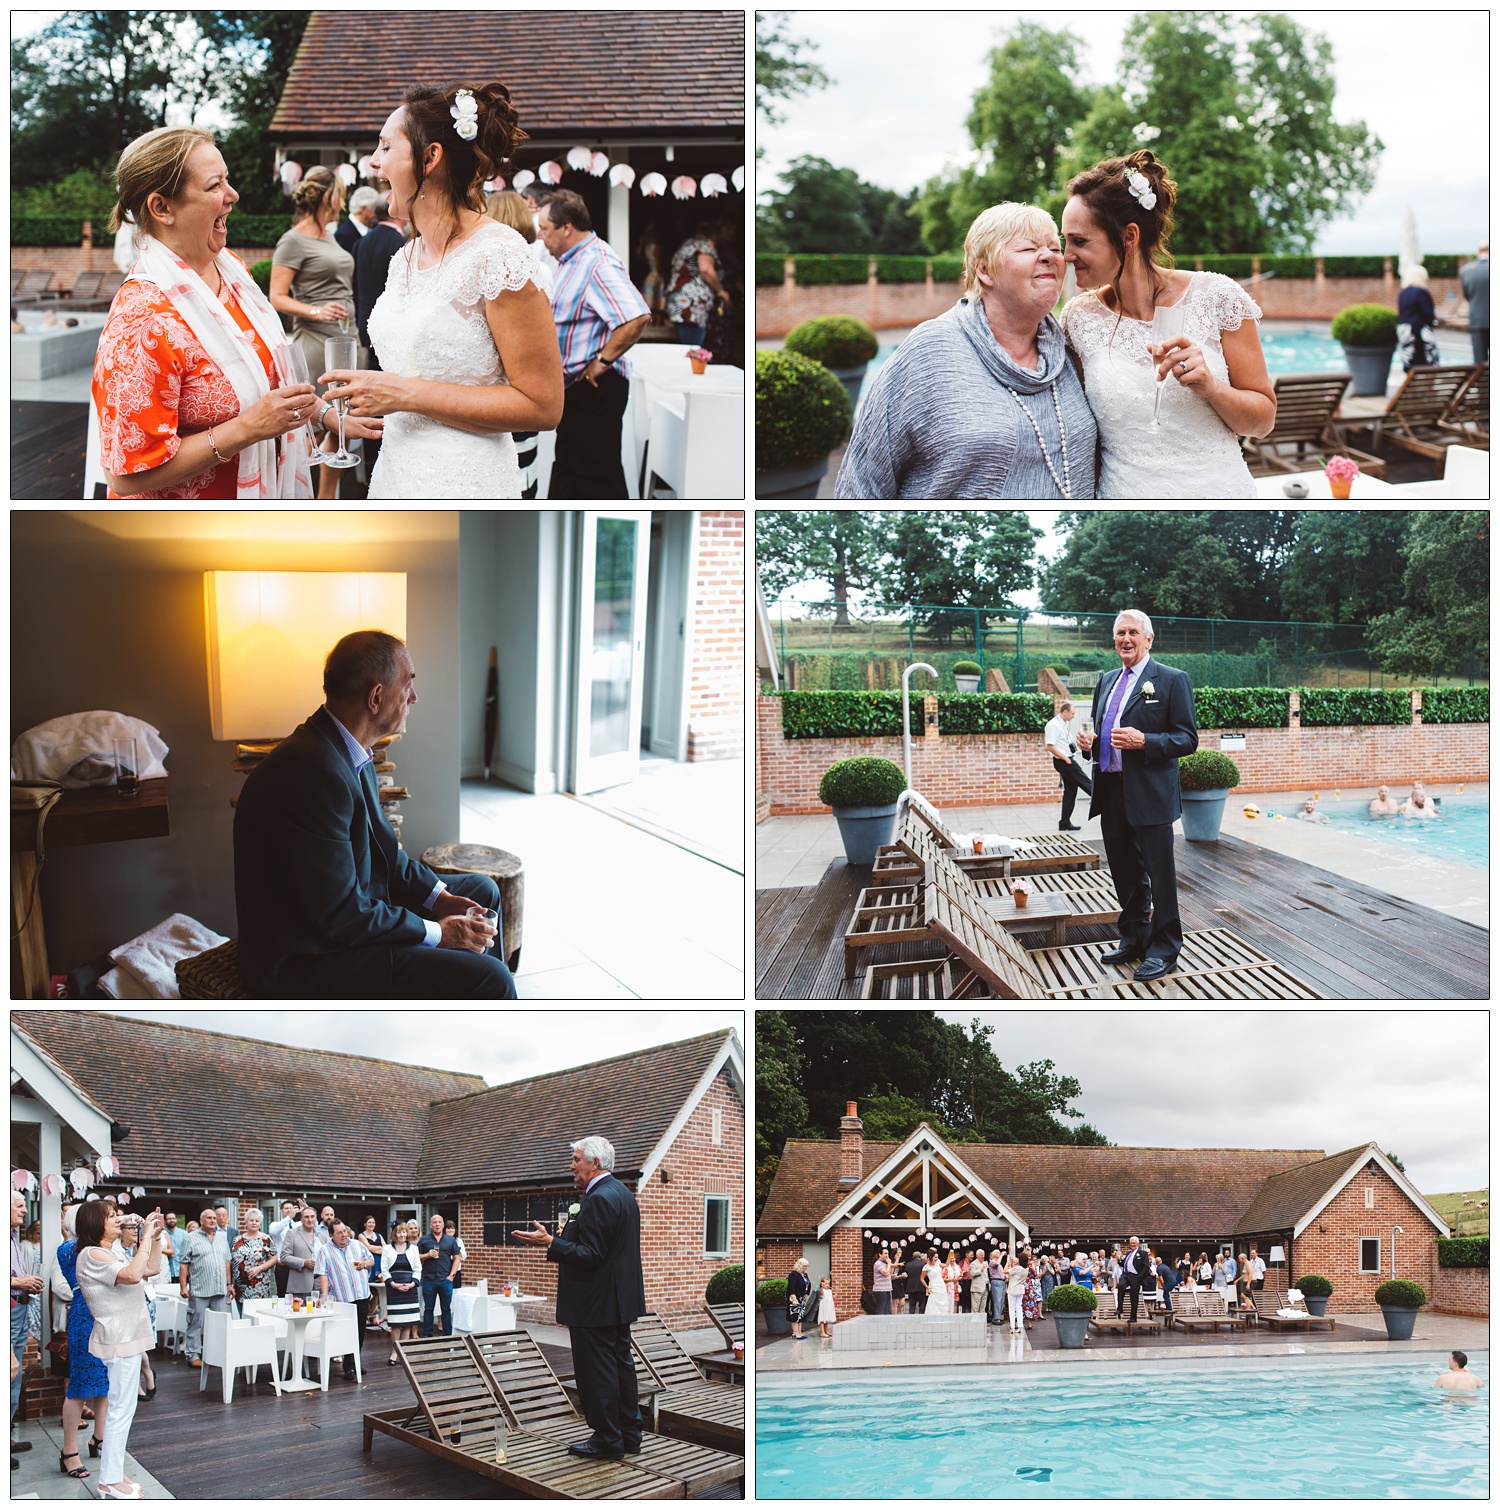 wedding guests and speeches at the Pool House Maison Talbooth